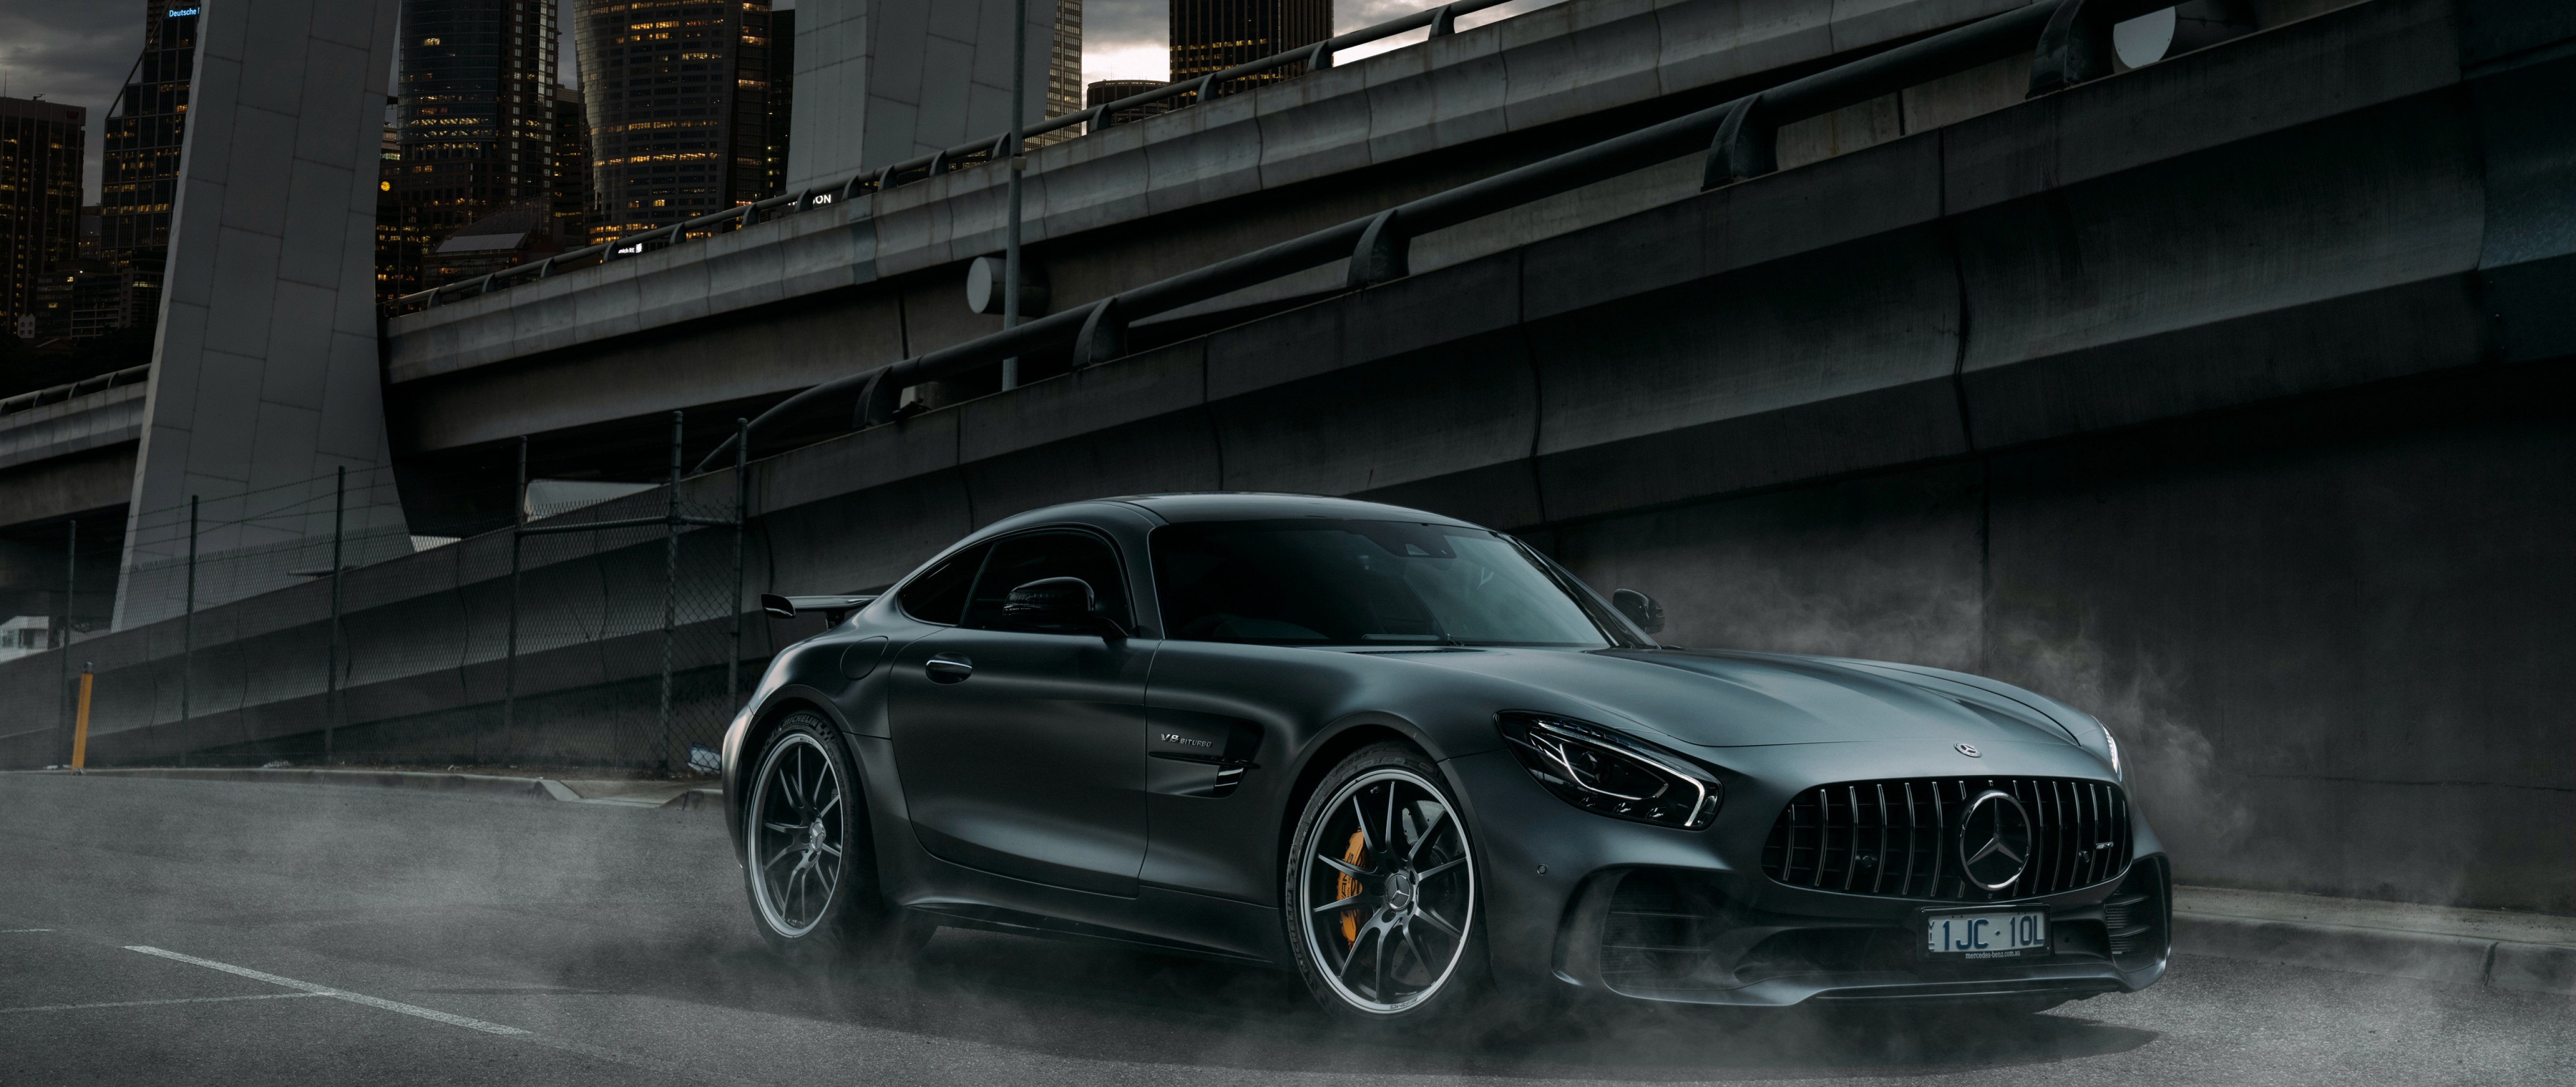 Free Download Mercedes Amg Gt And Benz Car Wallpaper For Desktop And